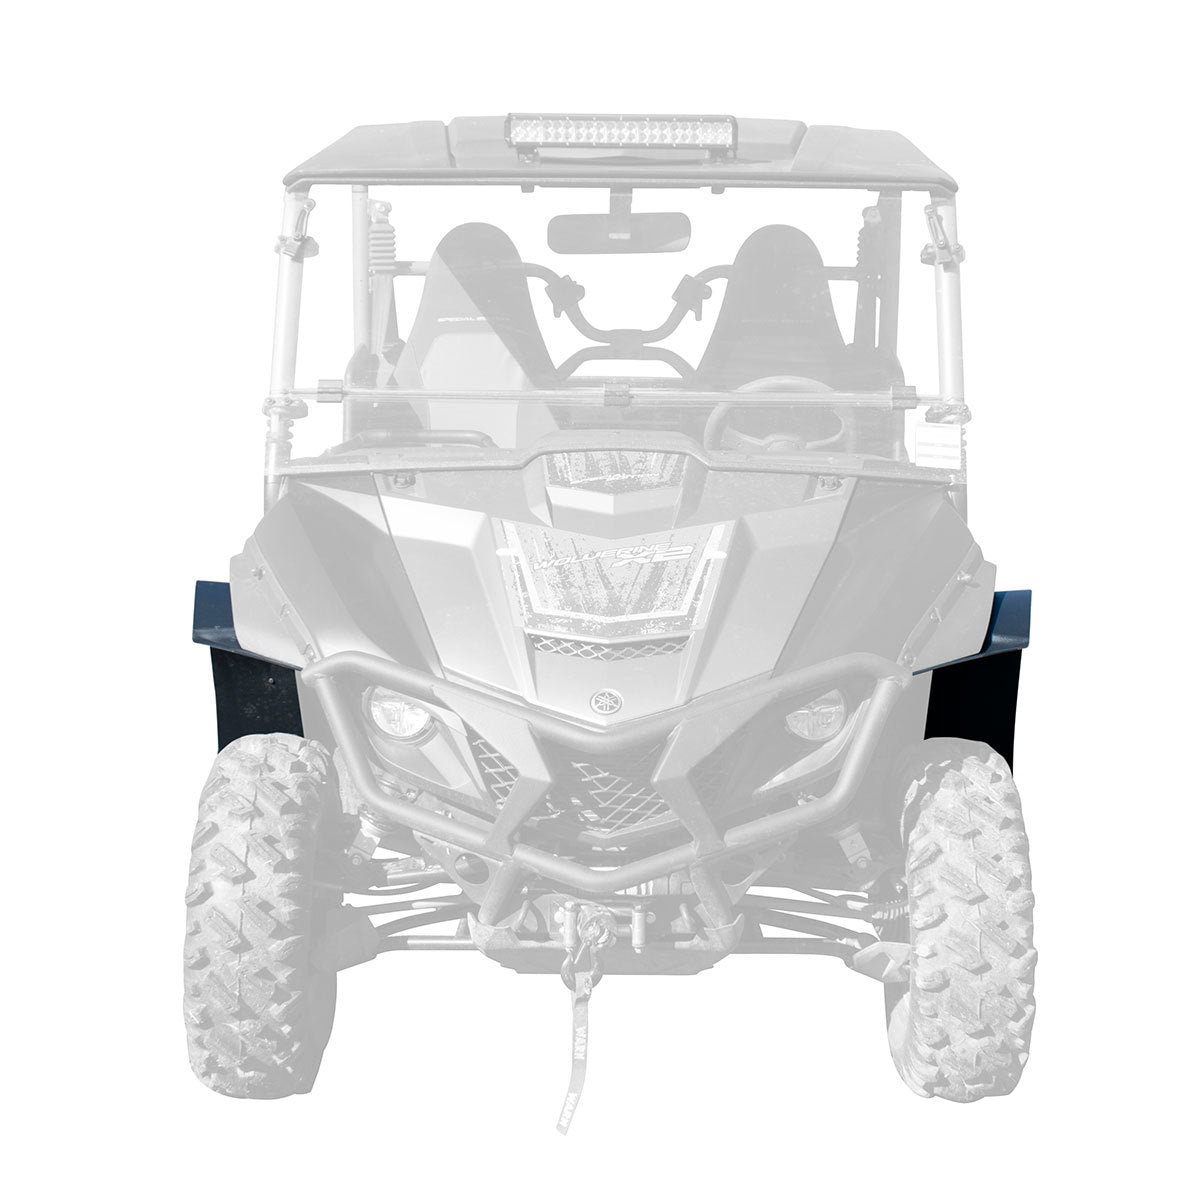 2019-2022 Yamaha Wolverine X2 R-Spec and R-Spec XT-R Super Max Coverage Fender Flares